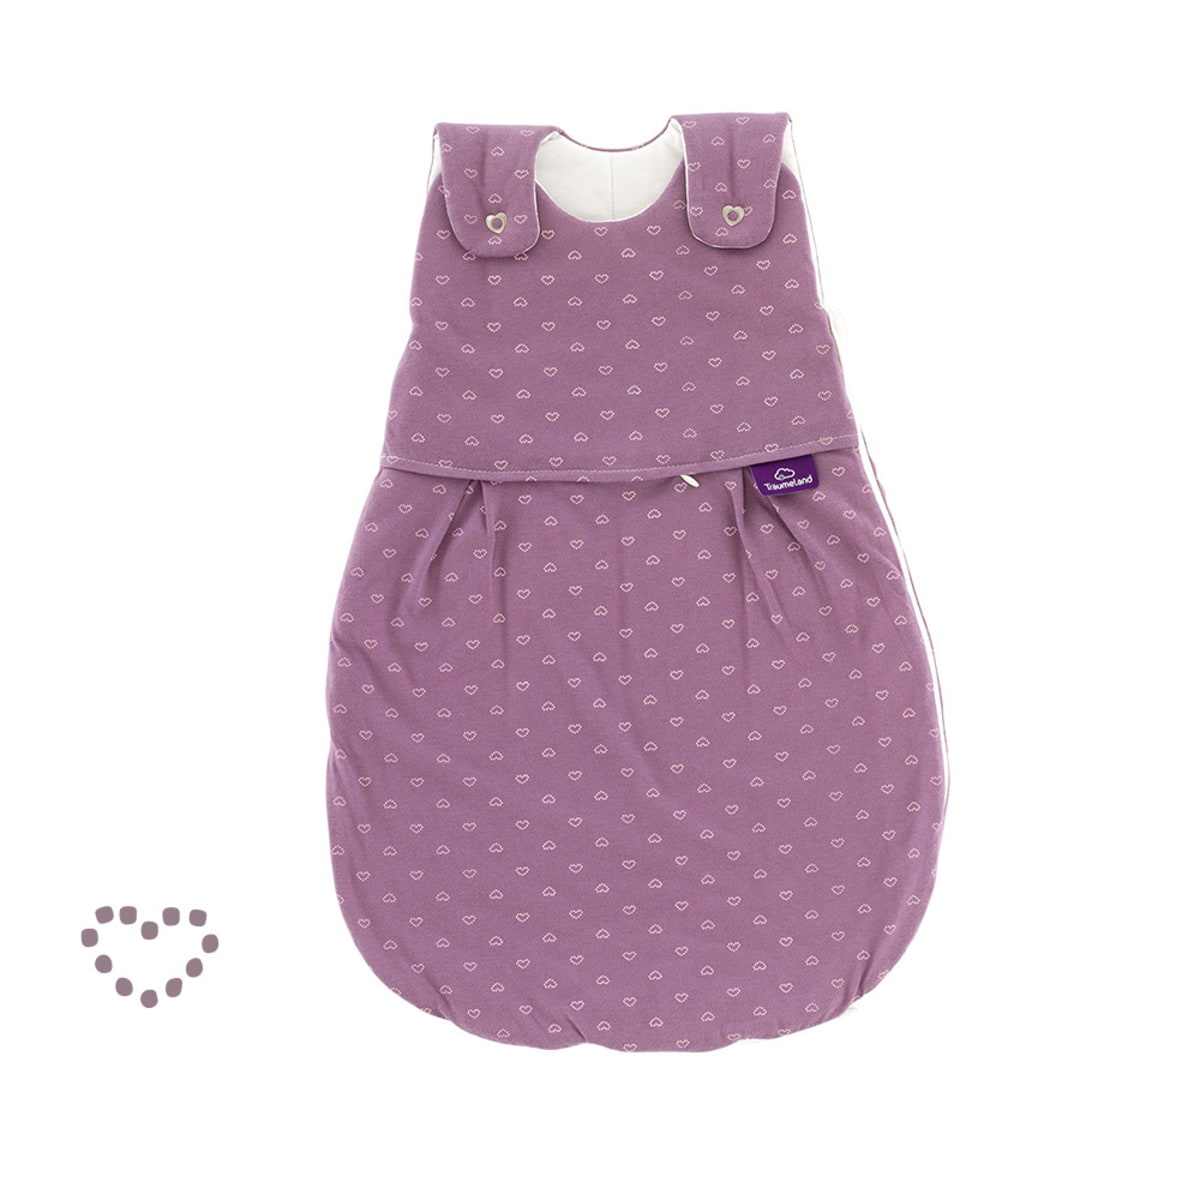 LIEBMICH sleeping bag in the design heartsome